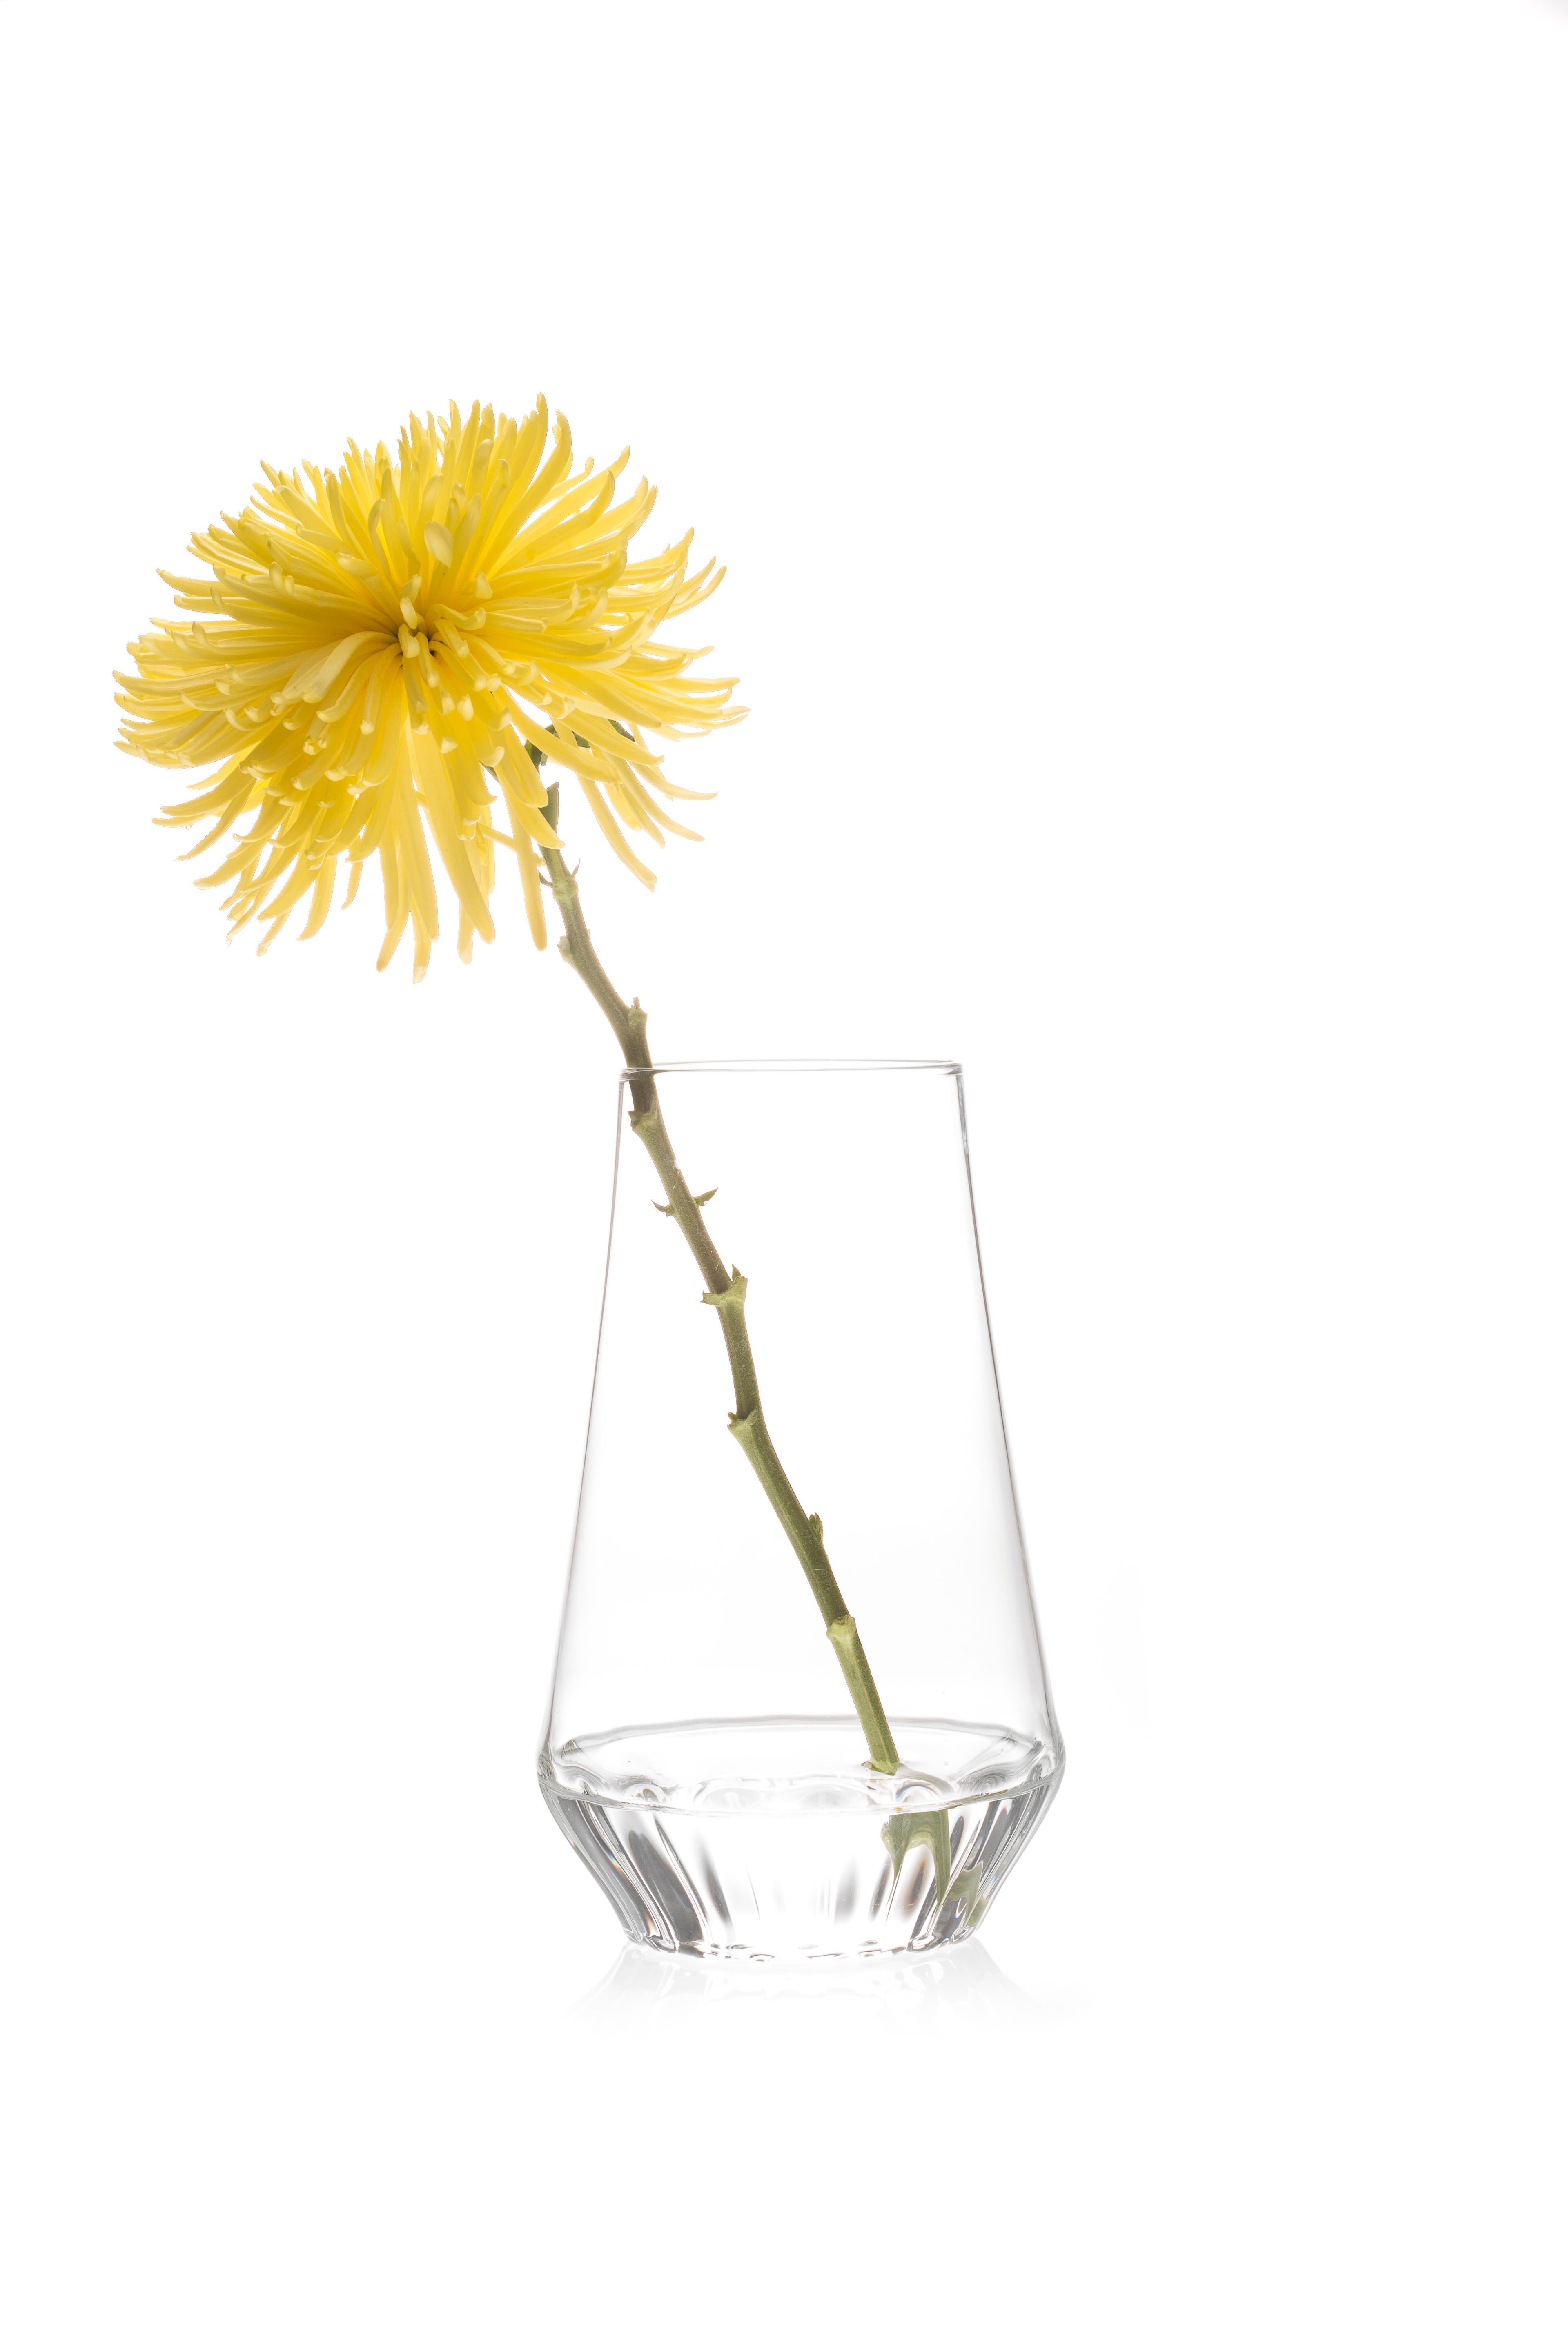 ROSSI VASE MEDIUM

From a single stem to a bouquet, the clear glass highlights the flower stem, celebrating it as an integral part of the arrangement. The lenticular effect of the fluted glass at the
bottom masks the ends of the stems and serves as